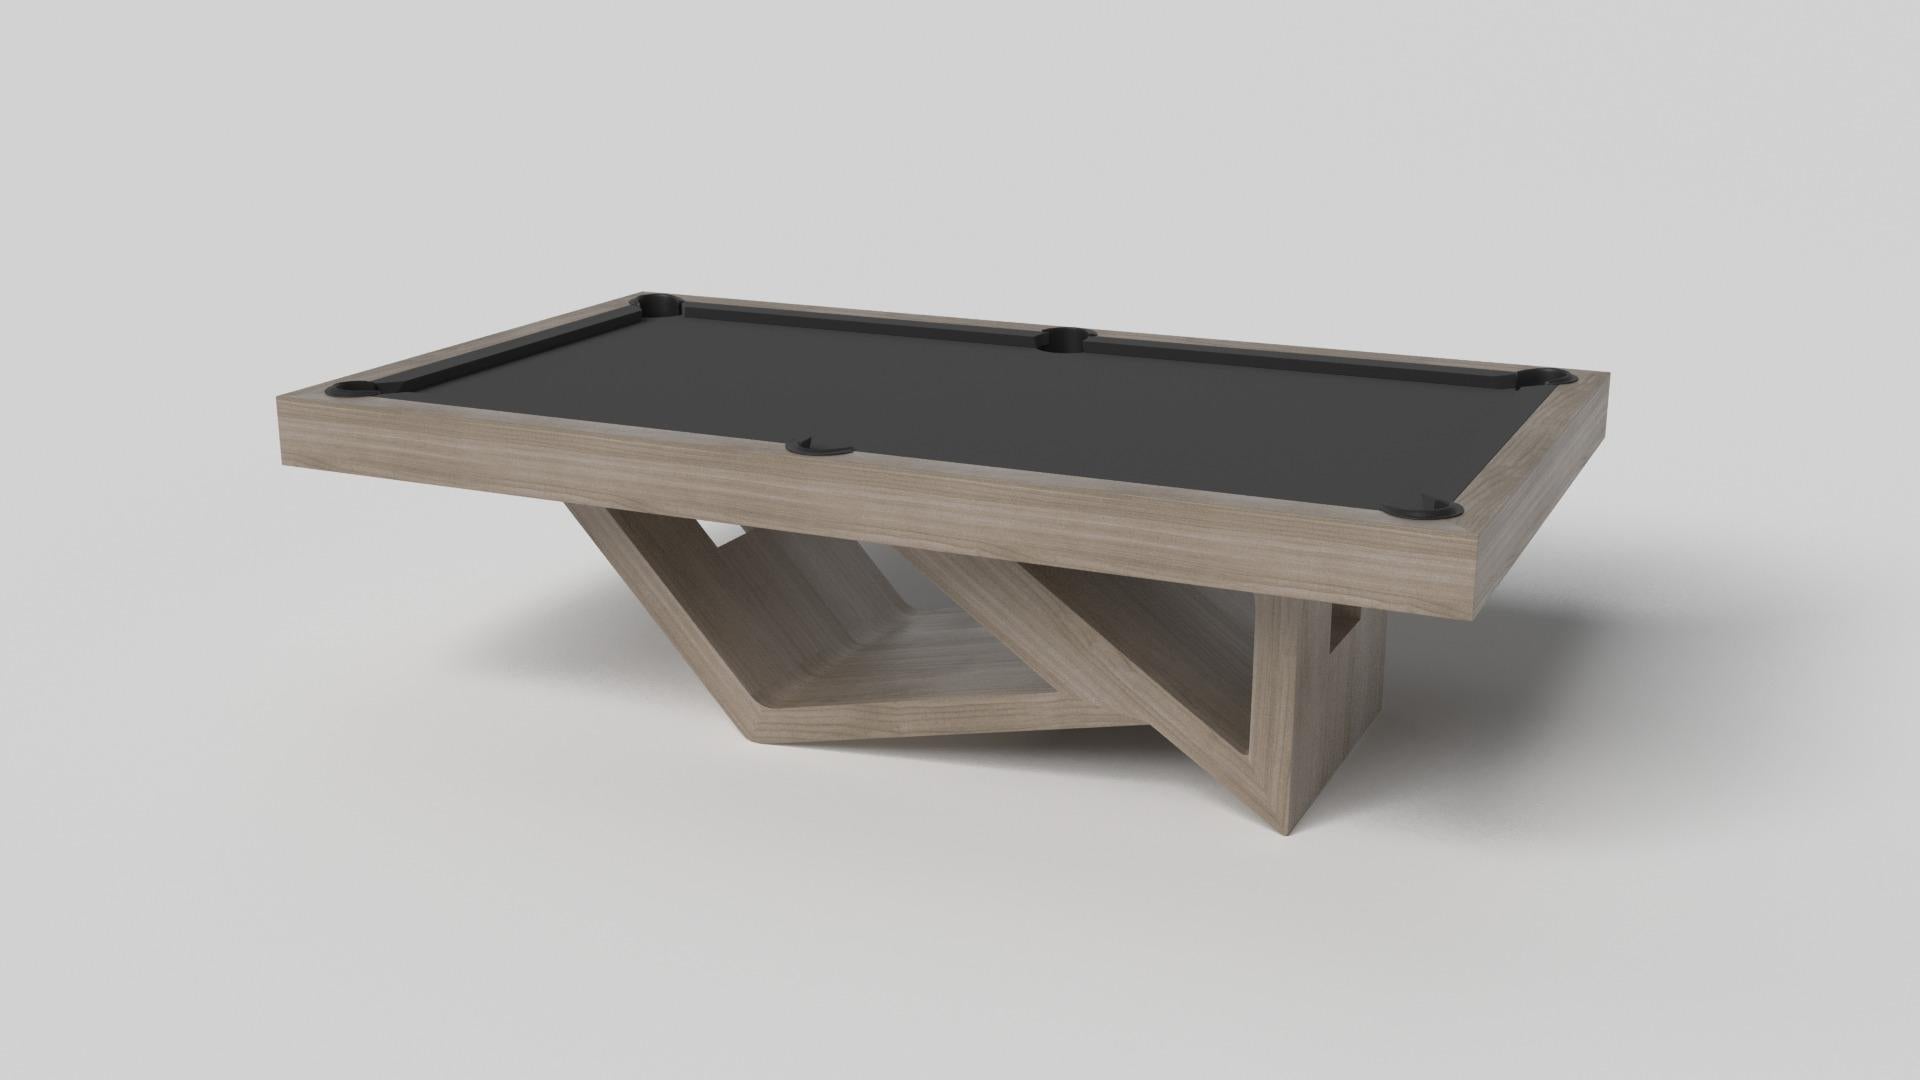 Drawing inspiration from the beauty of geometric forms, the Rumba pool table in brushed aluminum is characterized by a series of hollow and solid shapes that form an offset asymmetric base. Accented with a felt top for professional game play, this